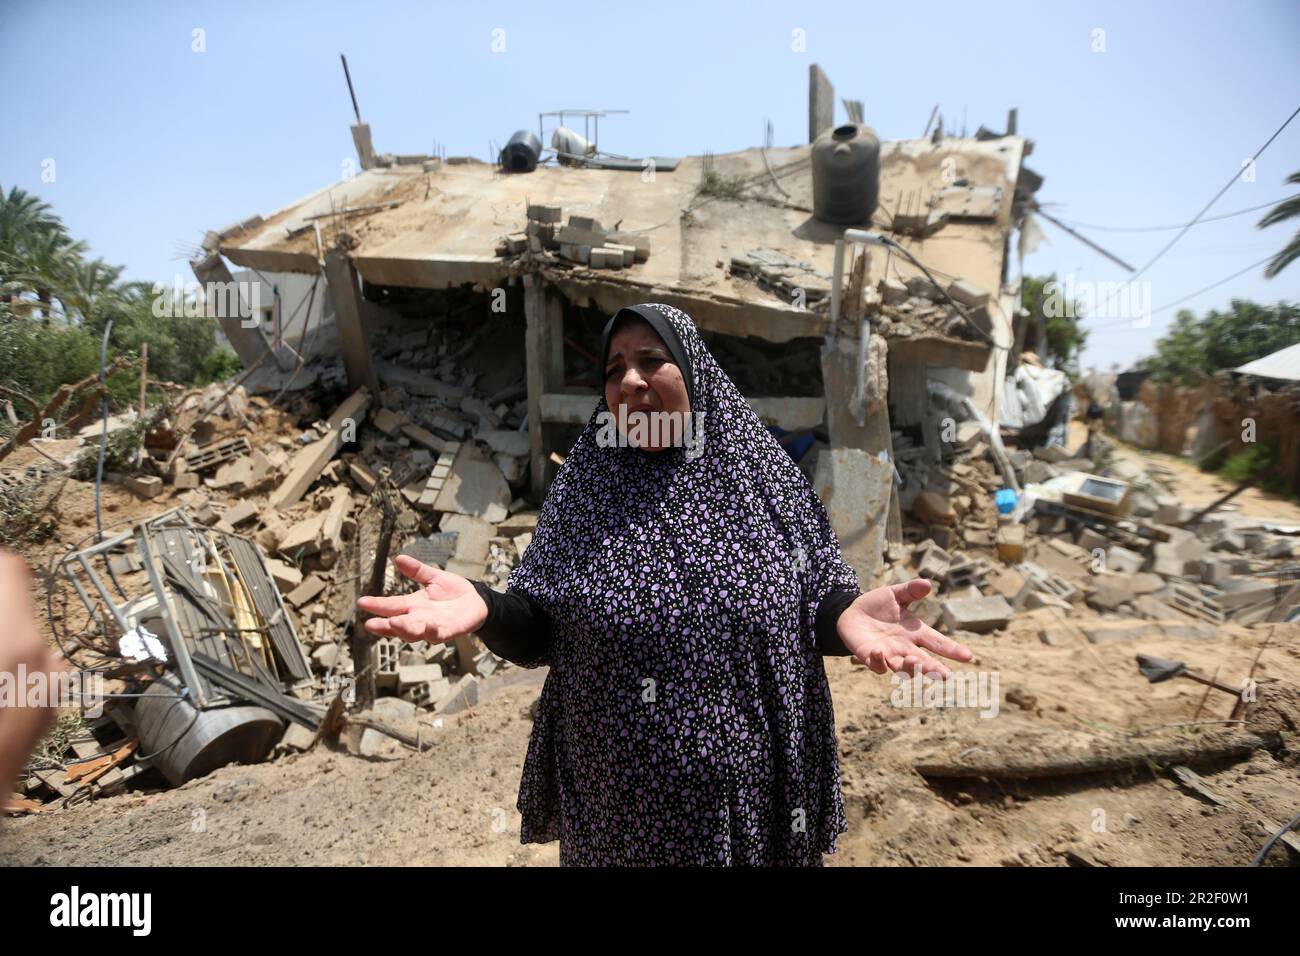 A woman is seen in front of a destroyed building belonging to the Al-Bashir Family after the Israeli attacks in Deir Balah, Gaza City. Palestine. Stock Photo